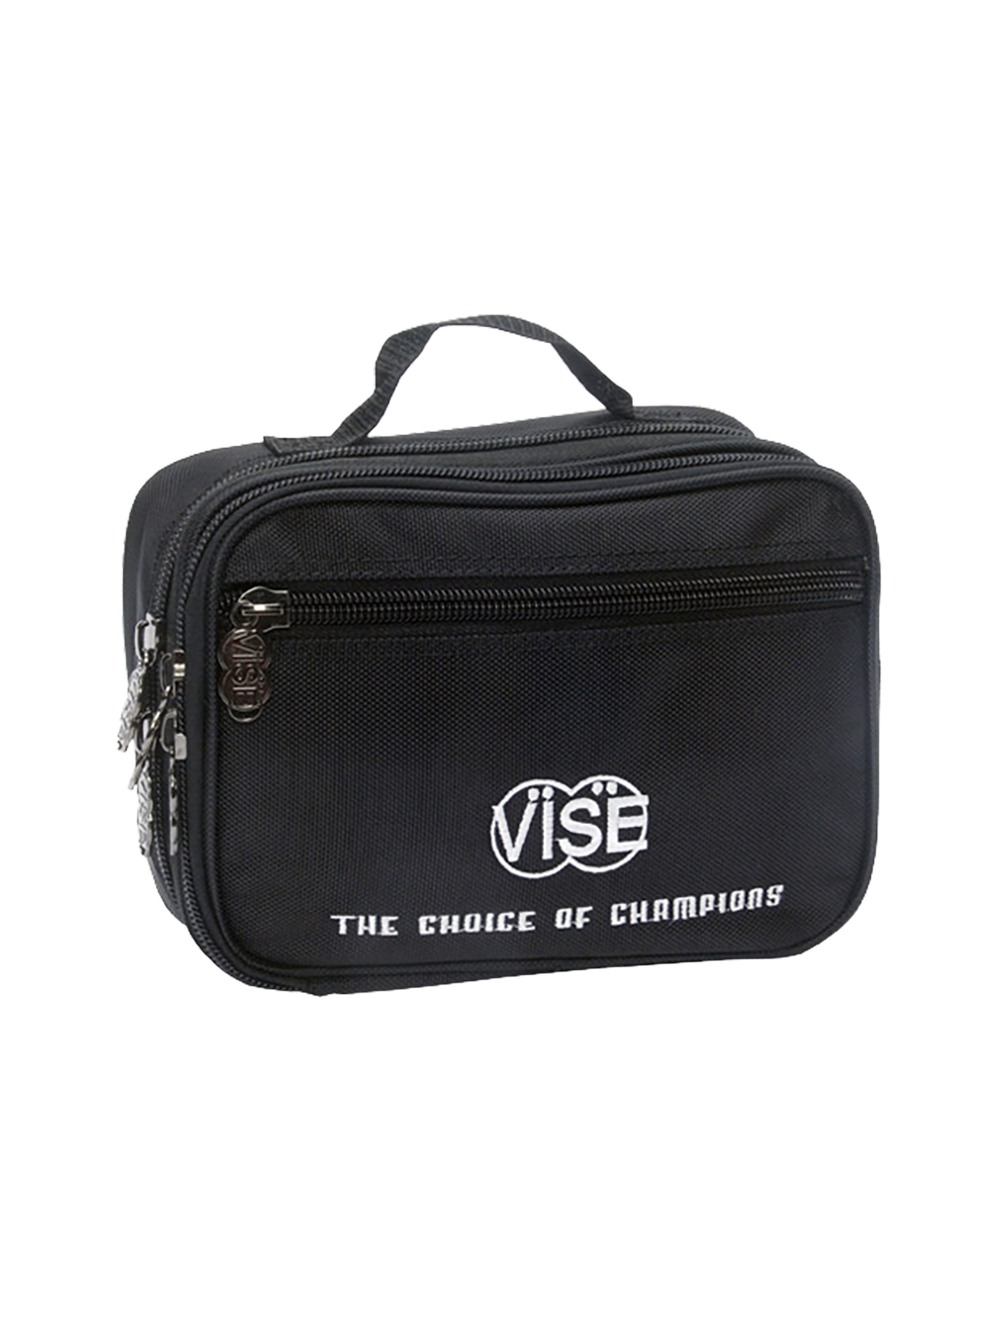 Vise Accessory Bag - Assorted Colors